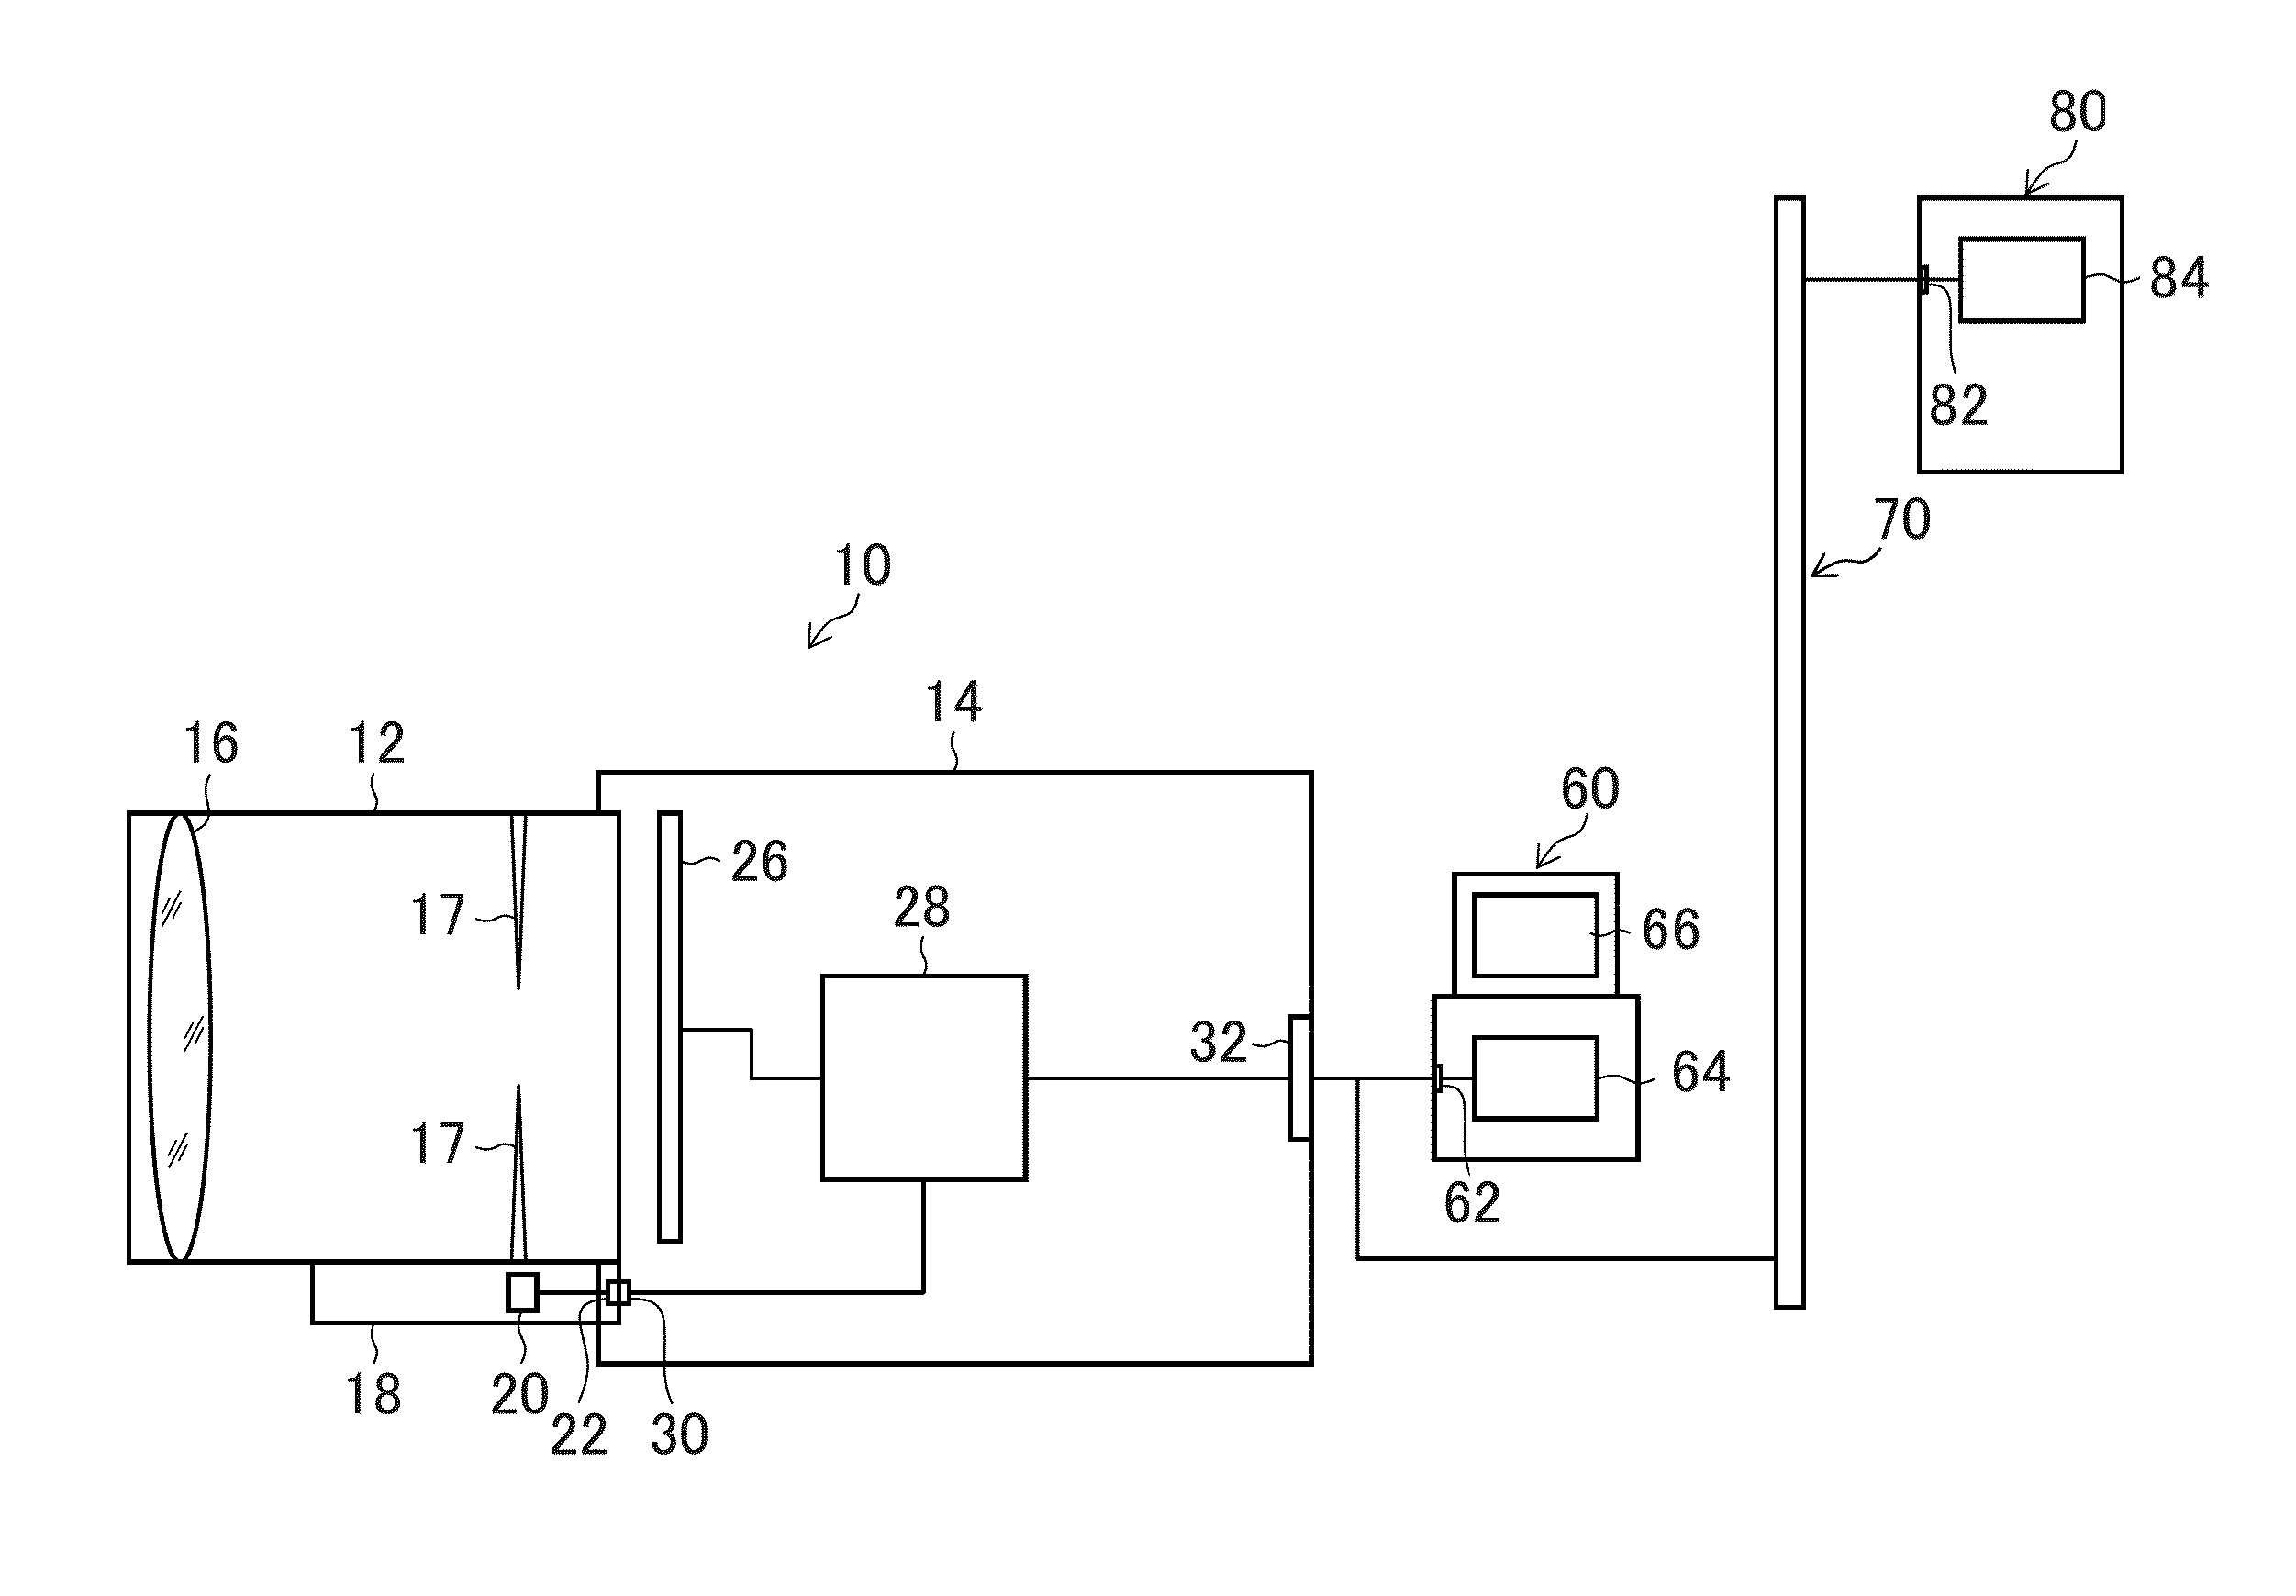 Image-processing device, image-capturing device, image-processing method, and recording medium